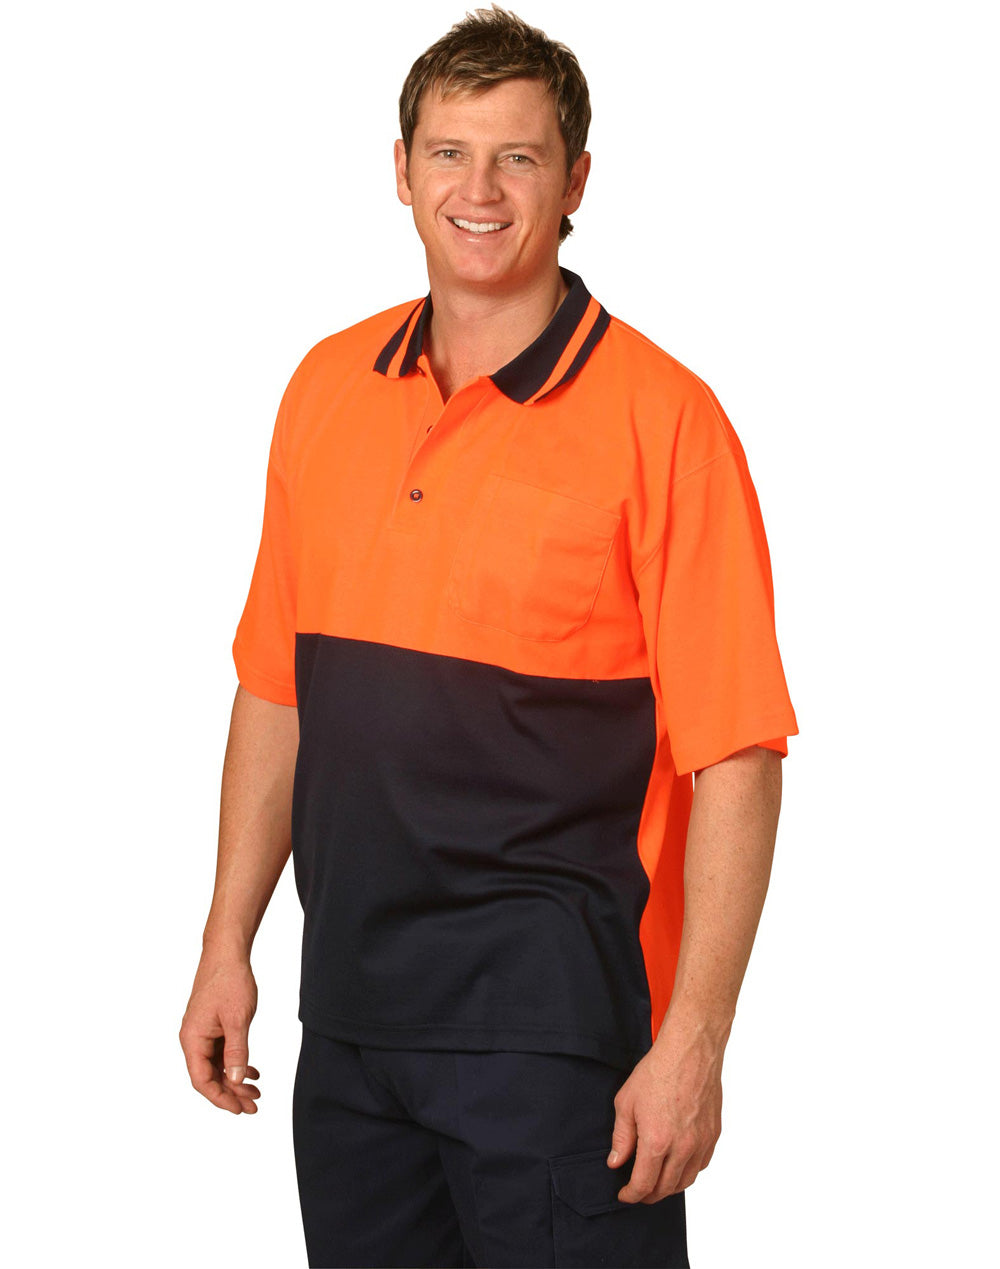 AIW SW12 SAFETY POLO